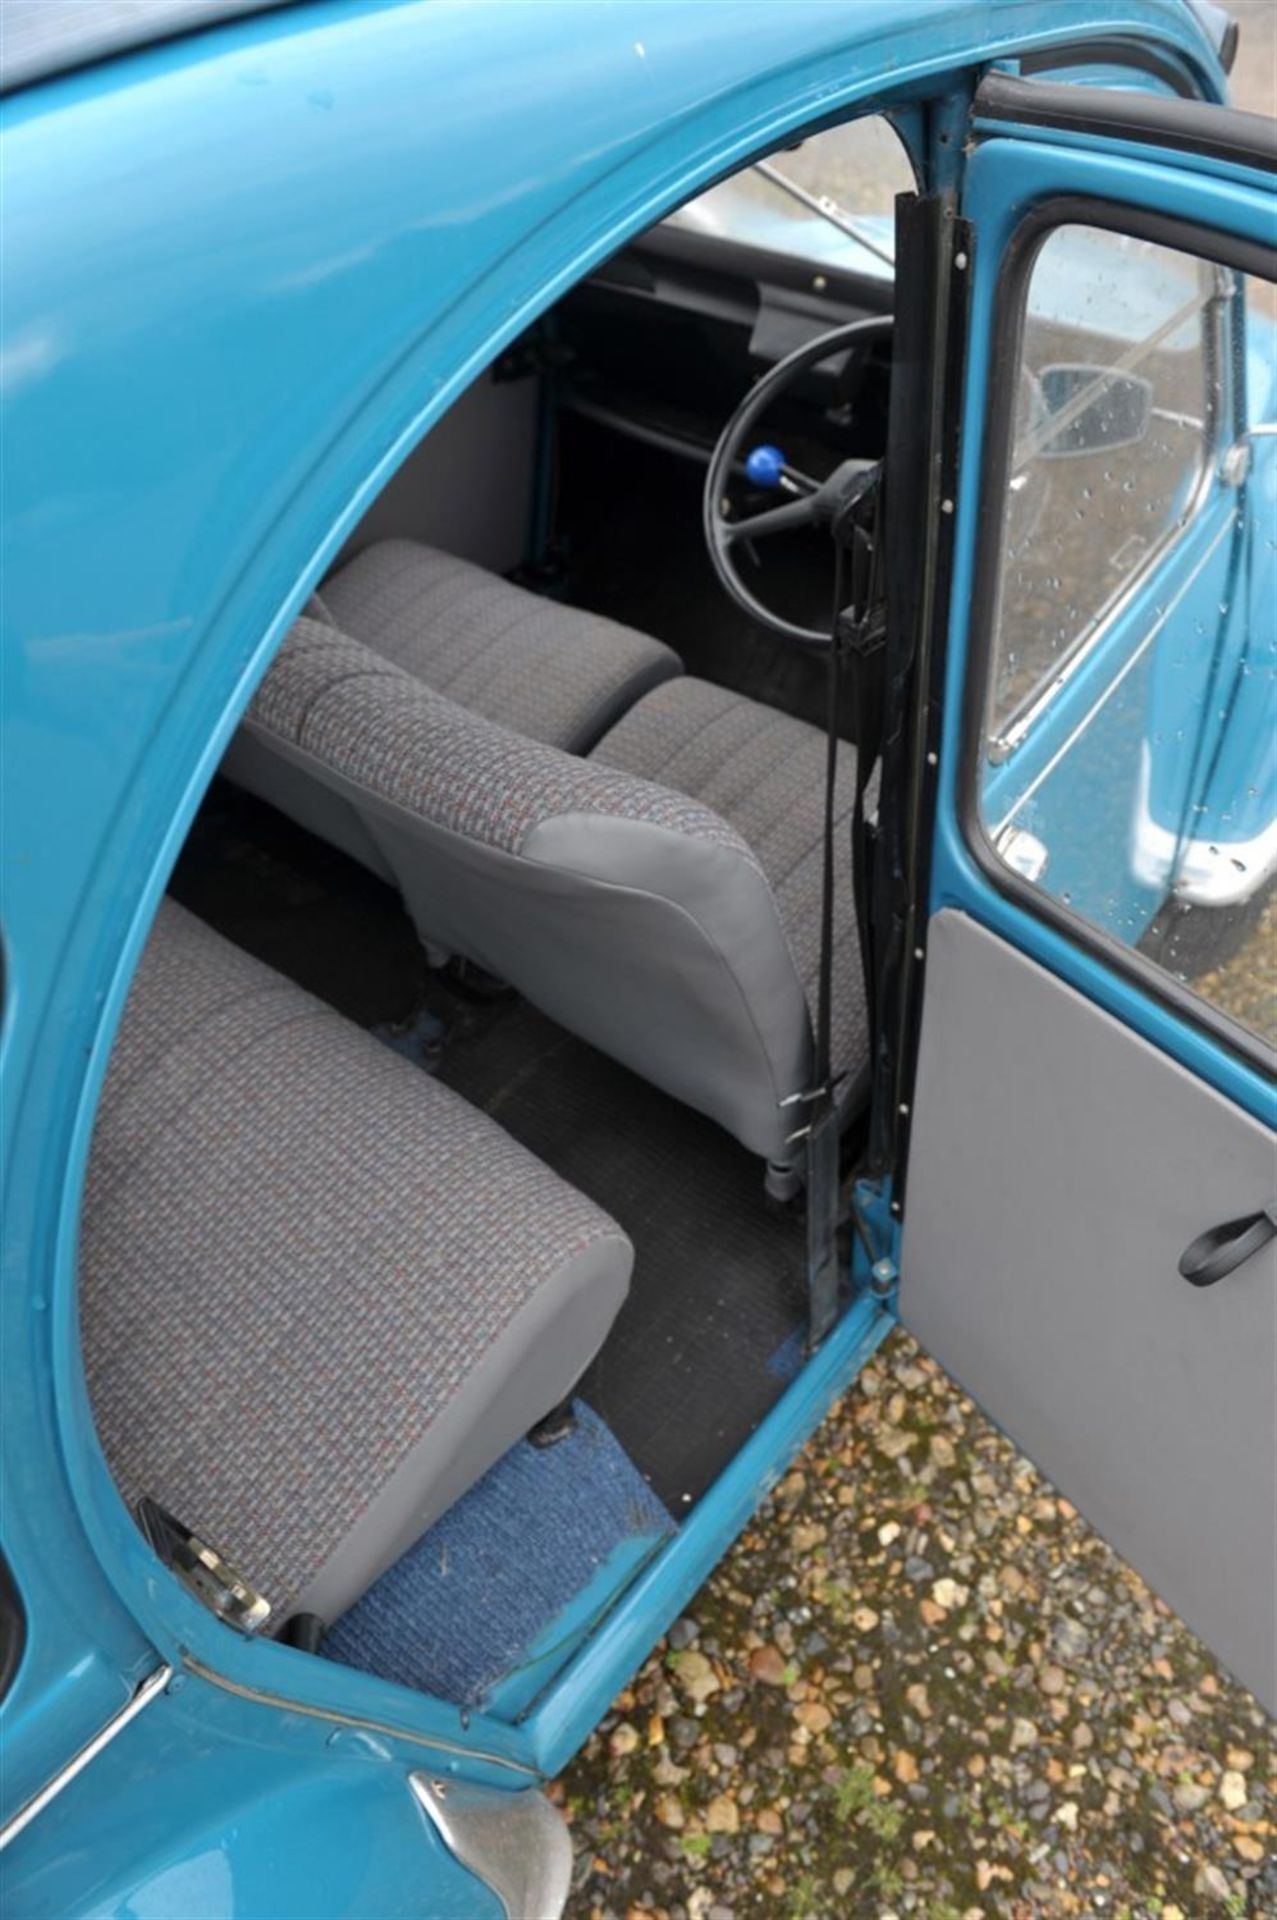 Citroen 2CV 6 Special. 4 door saloon car. 602cc in blue. - Date of first registration 10 January - Image 12 of 18